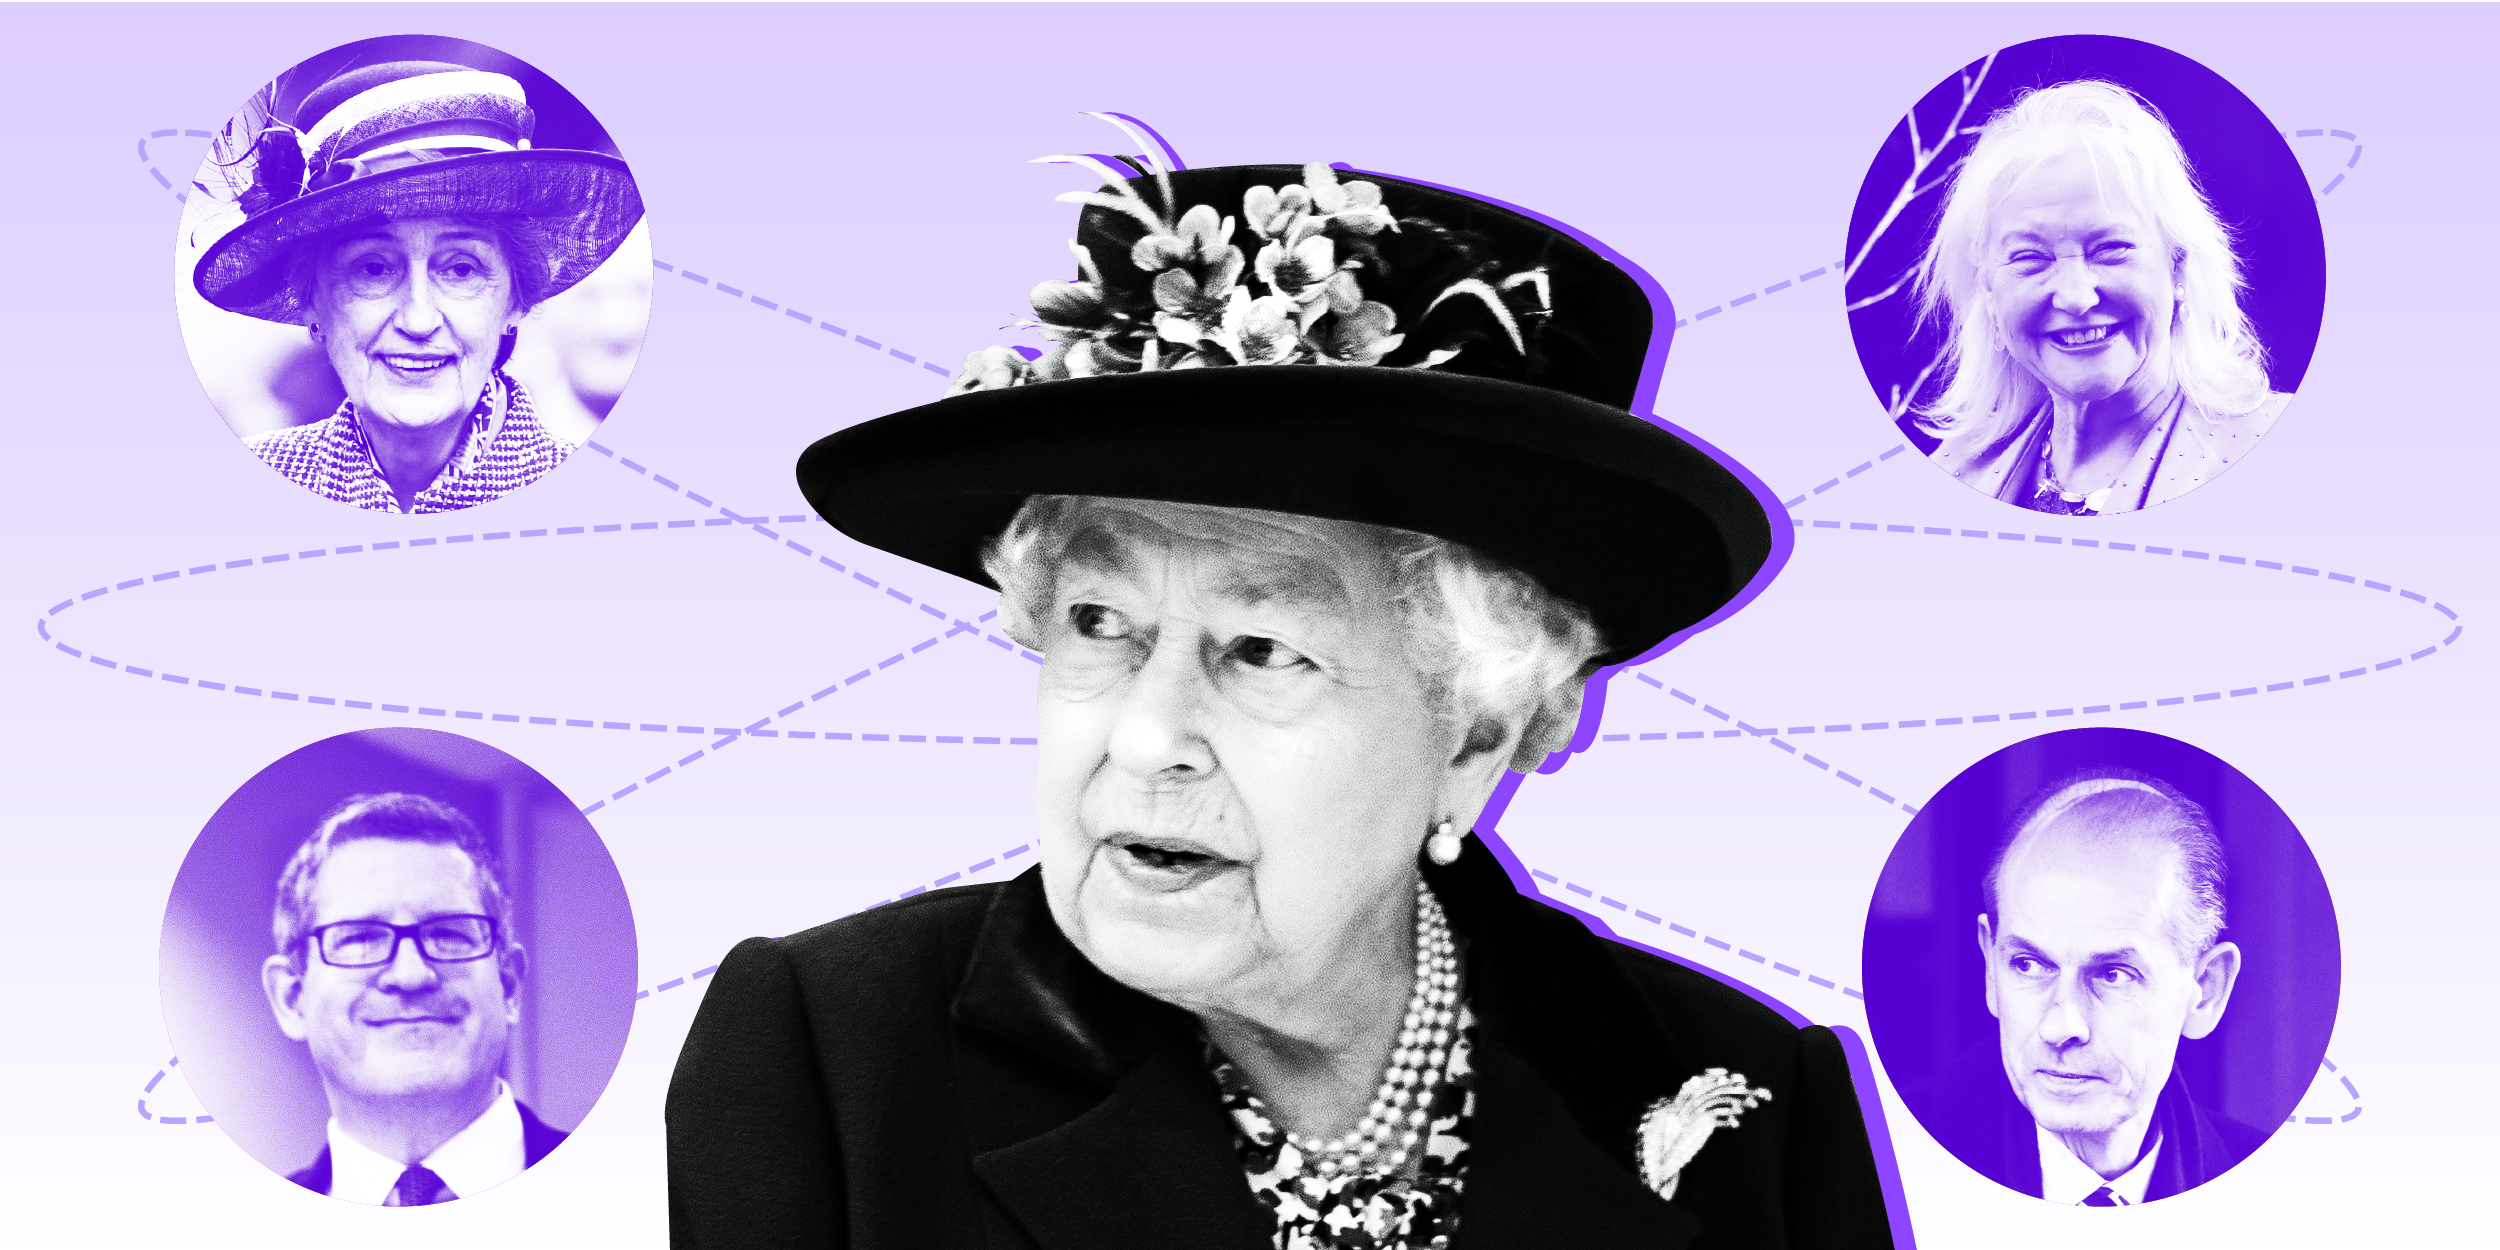 Queen Elizabeth on a purple background surrounded by four people in her orbit: Angela Kelly, Paul Whybrew, Lady Susan Hussey, and Andrew Parker